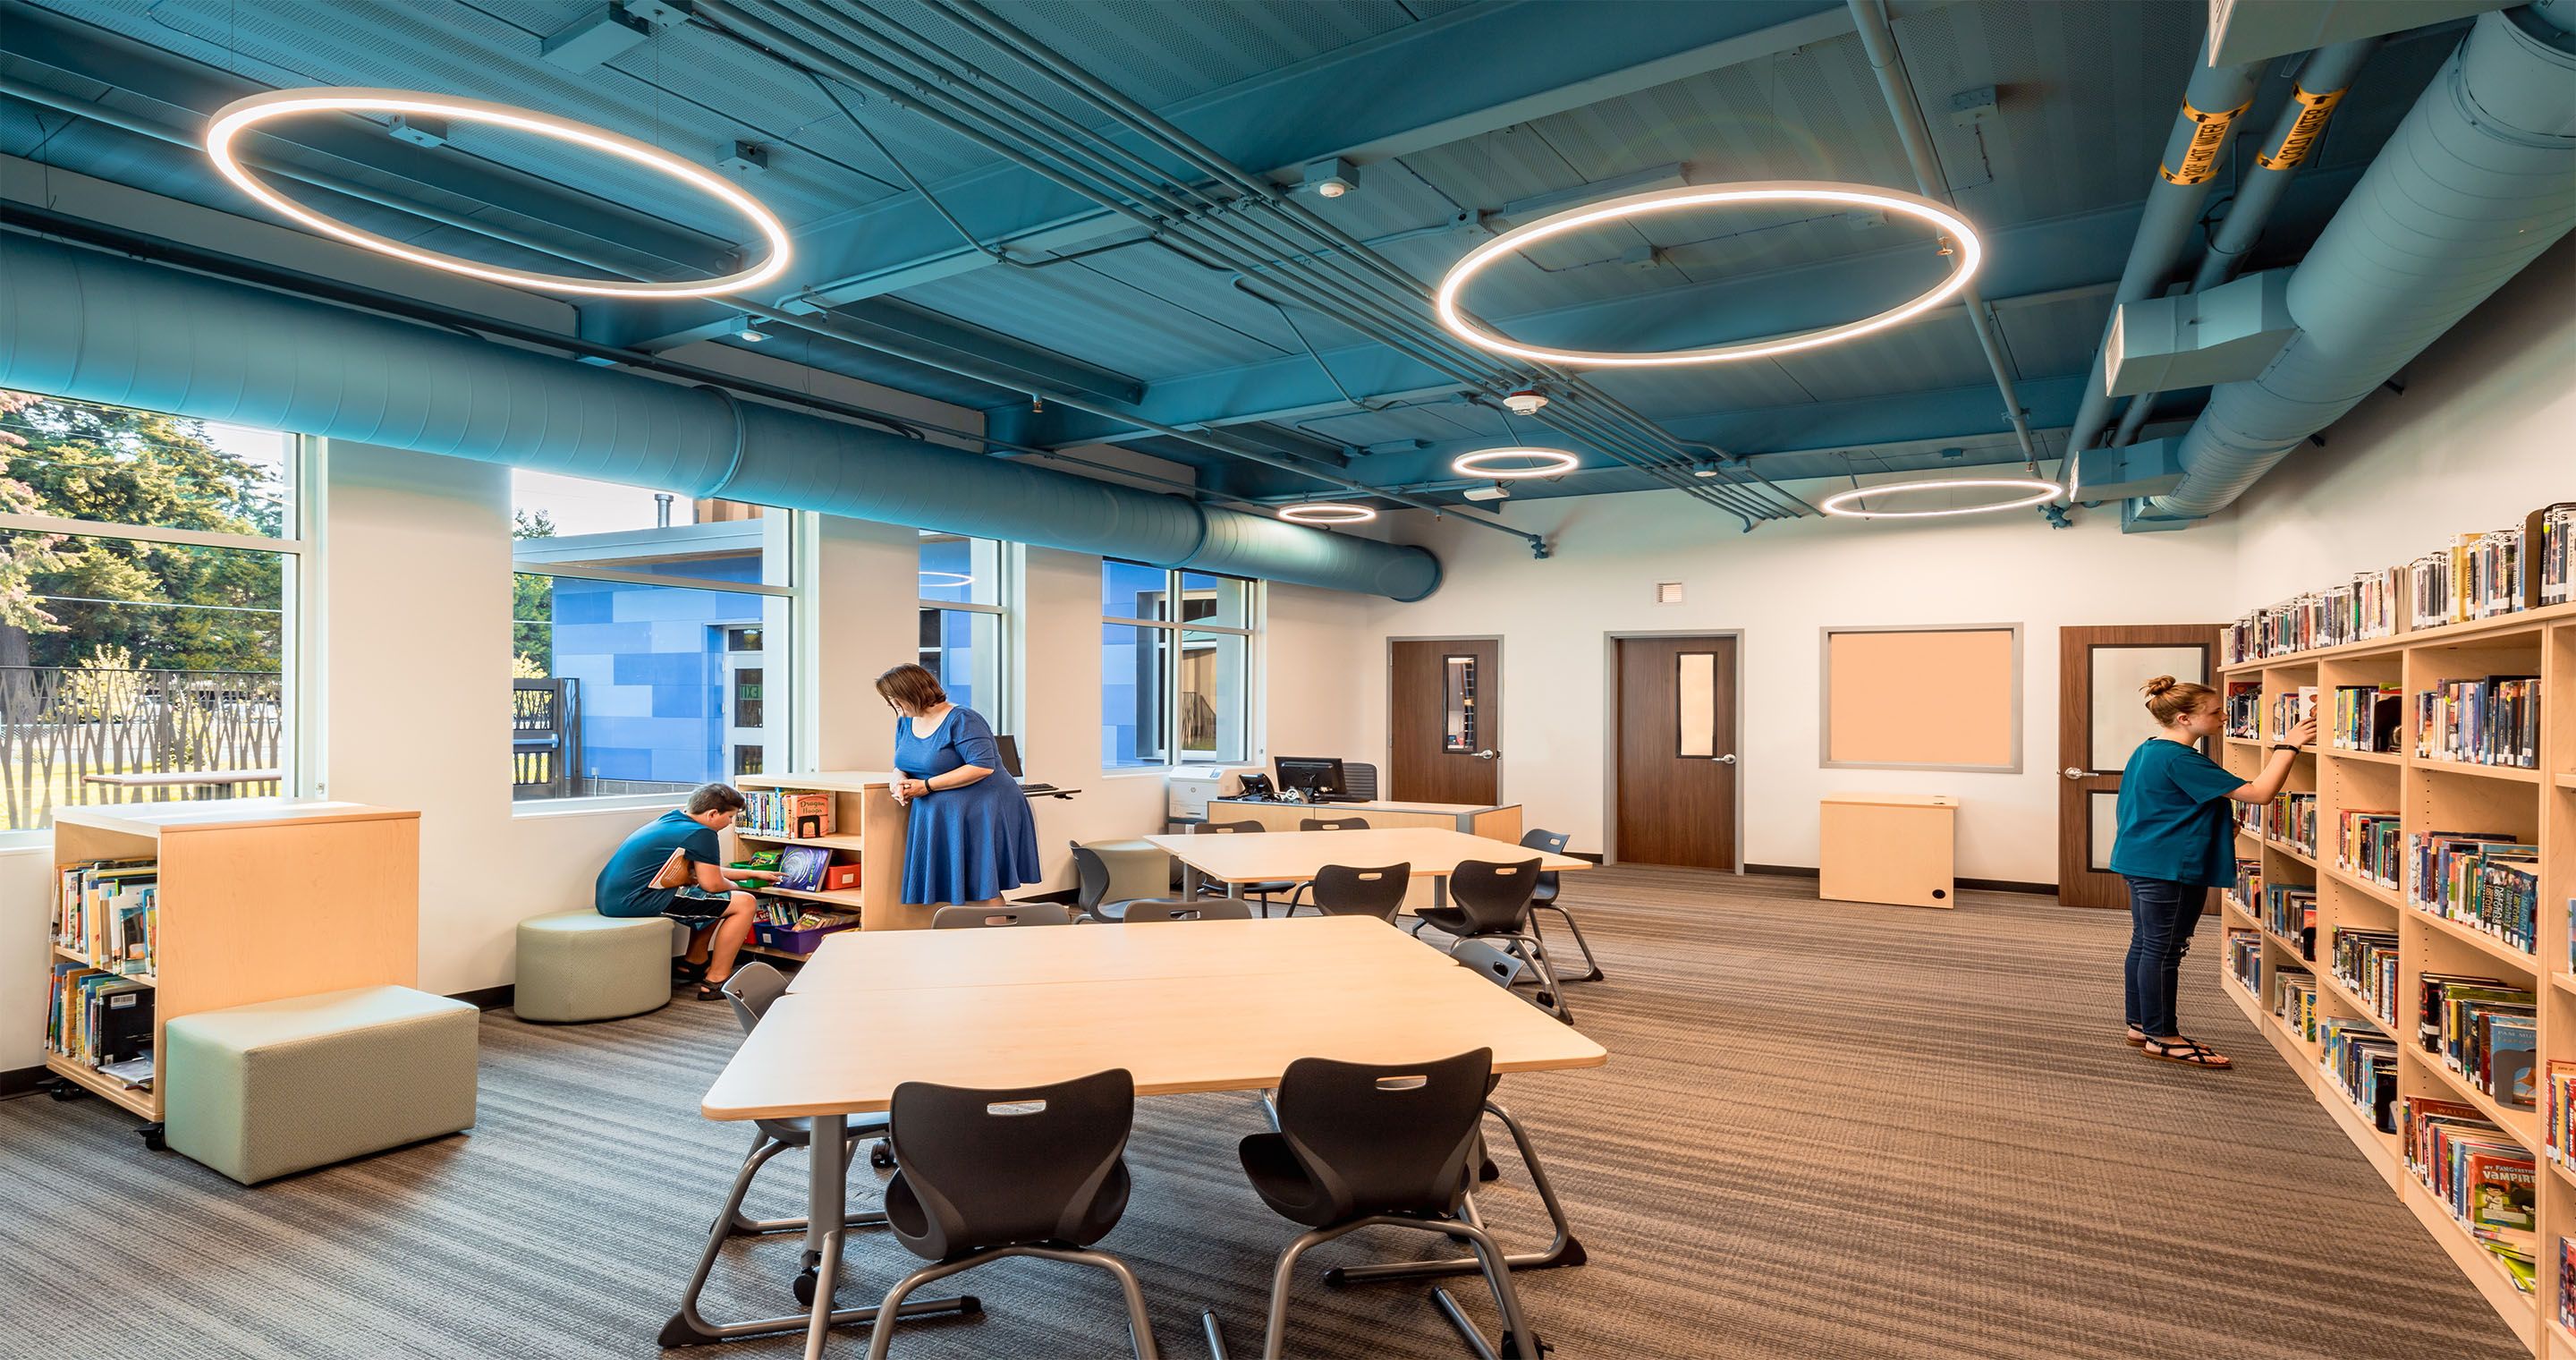 For Jim Tangeman Center being a small building with only 10 classrooms, LSW set out to accomplish a uniquely distributed design with appropriate spatial divisions between students across grade levels.